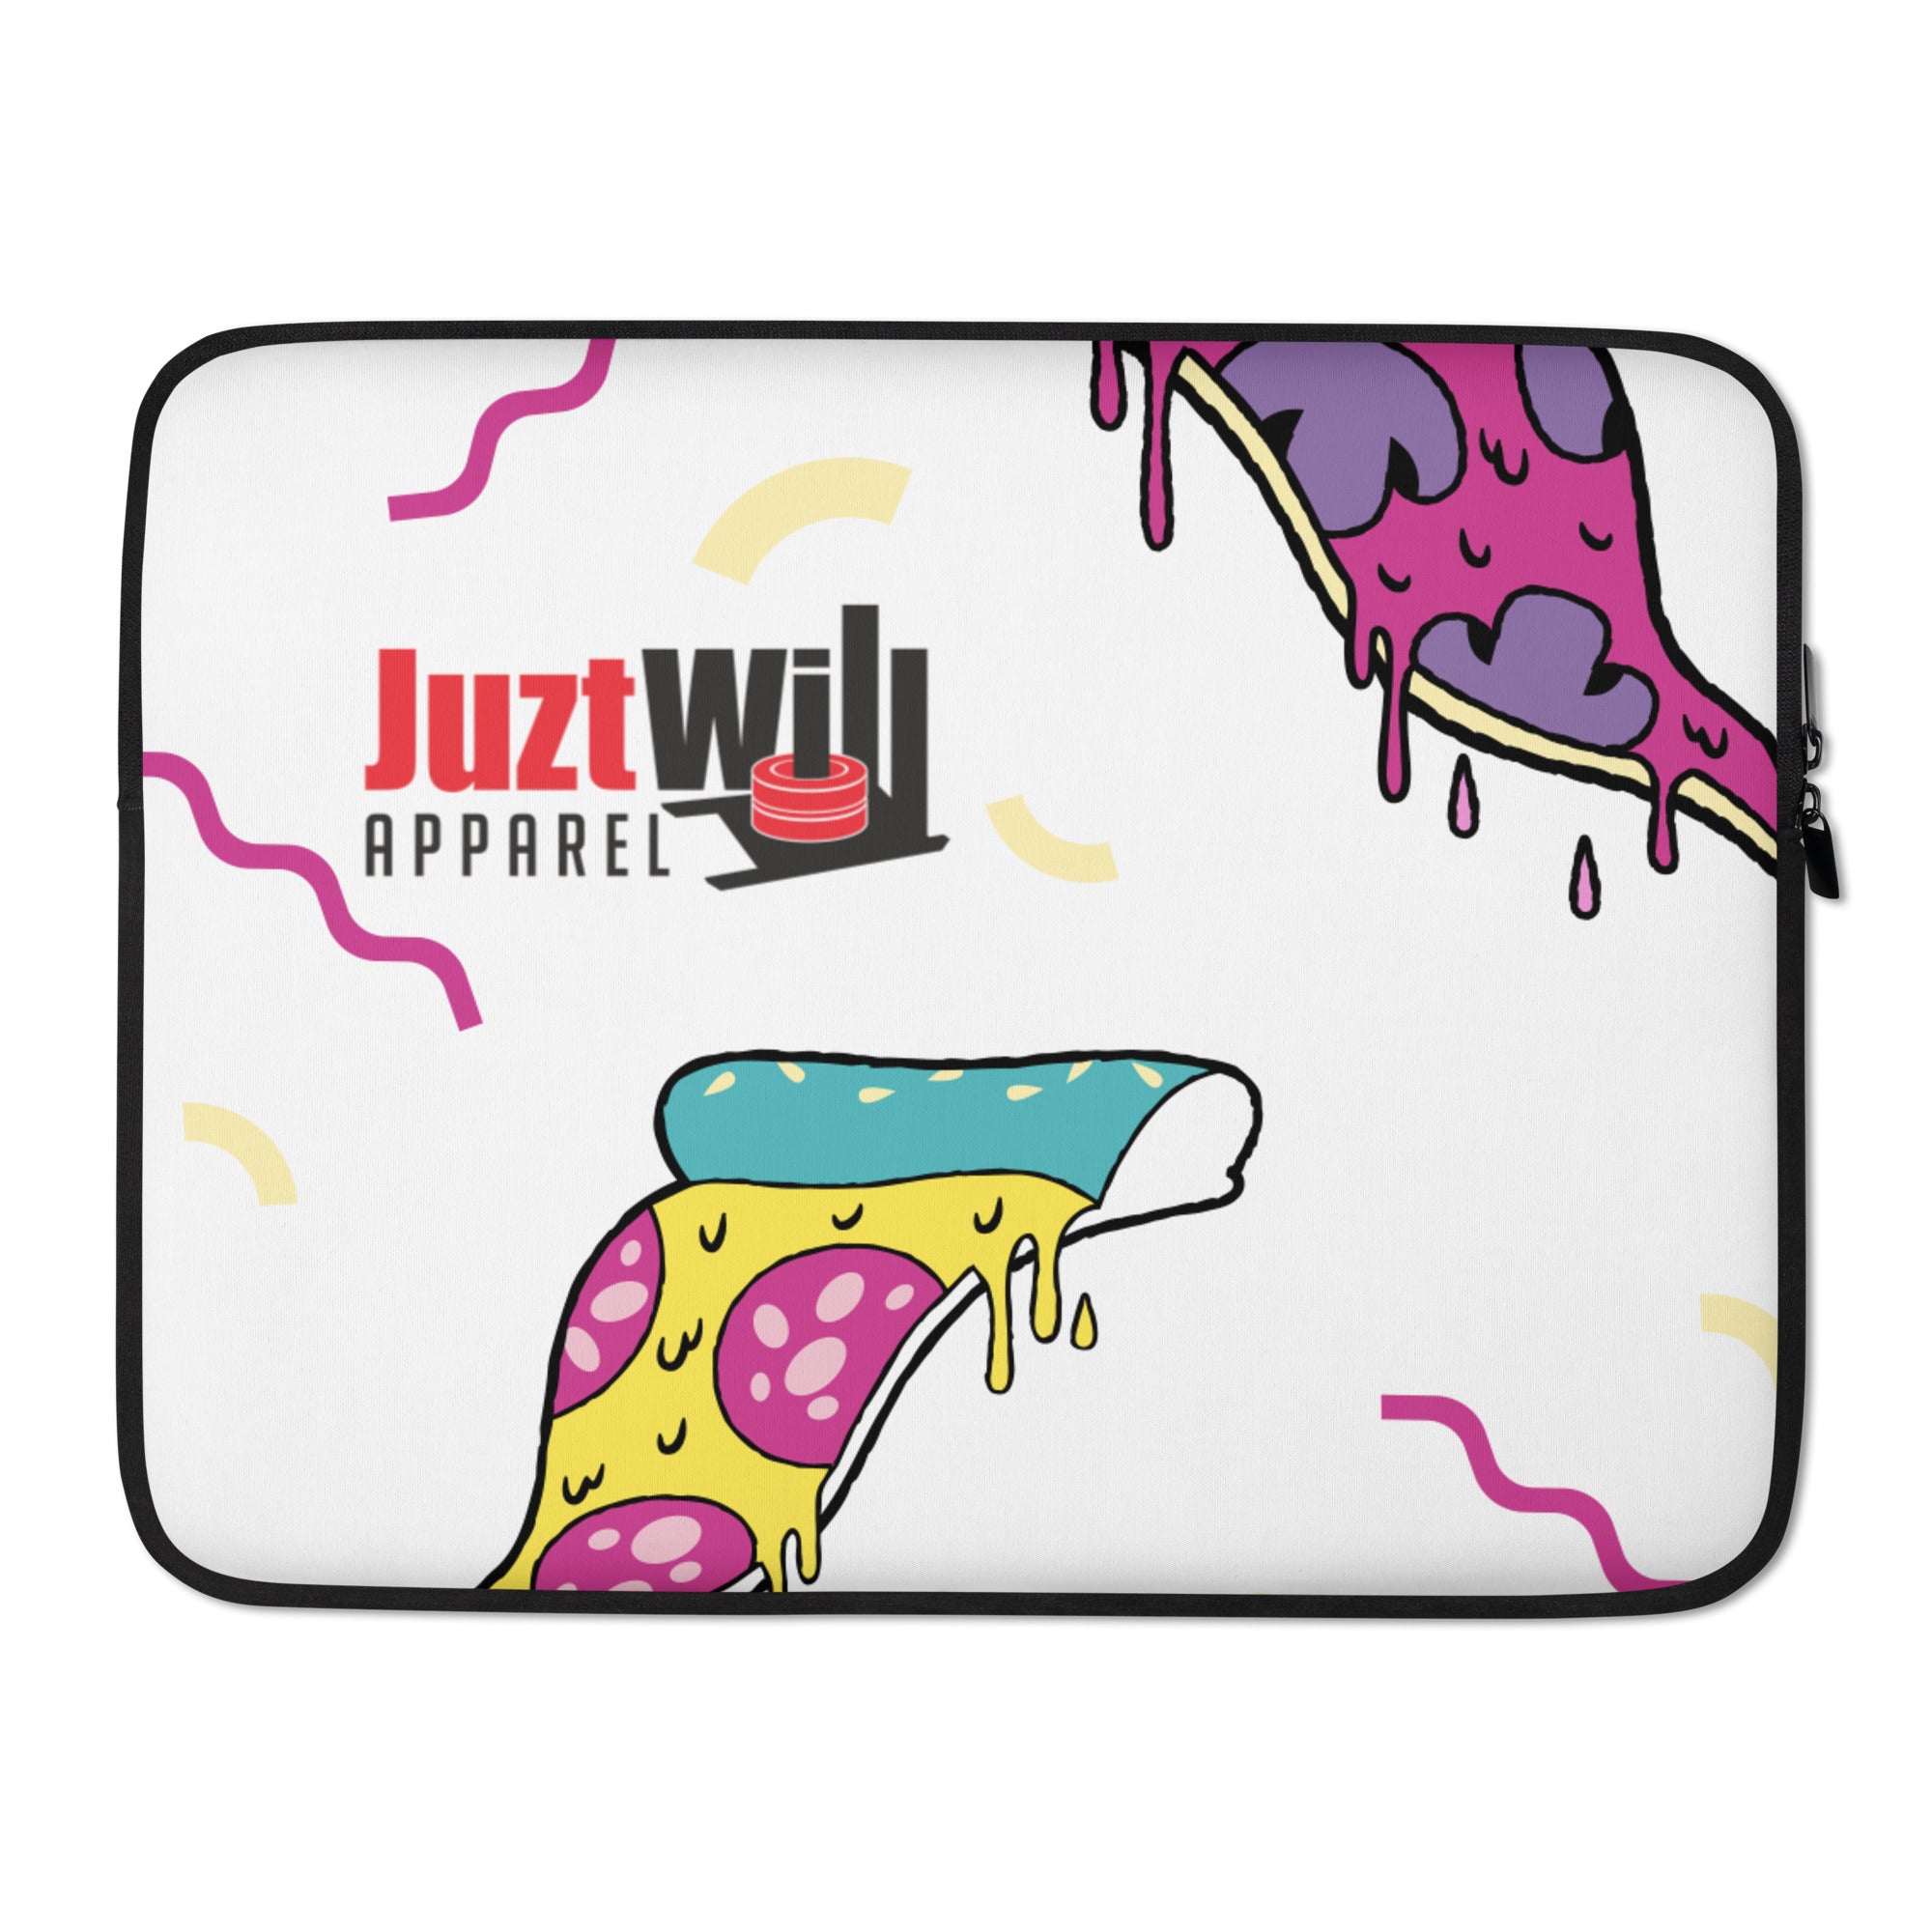 The Pizza Party Laptop Sleeve Juzt – Apparel Will